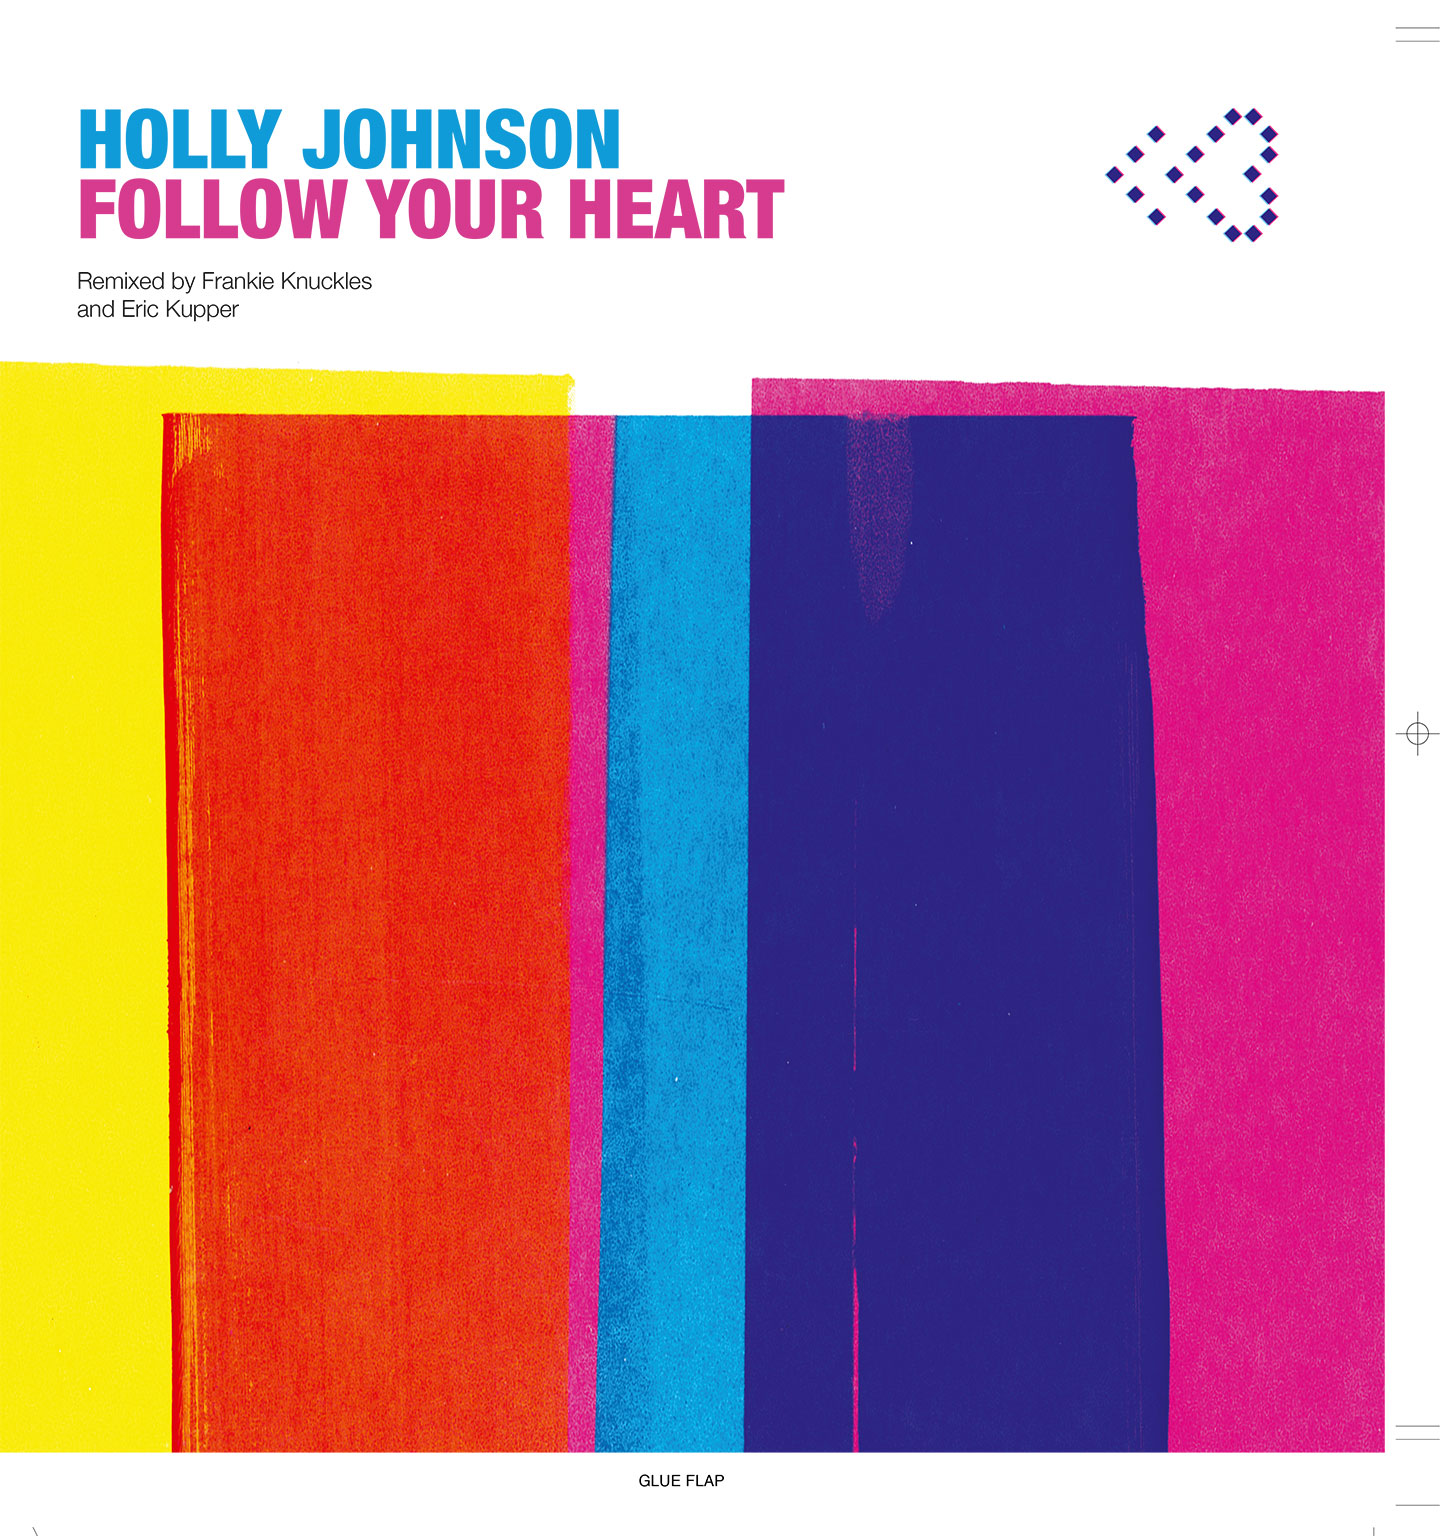 Holly Johnson ‘Follow Your Heart’ is out now!